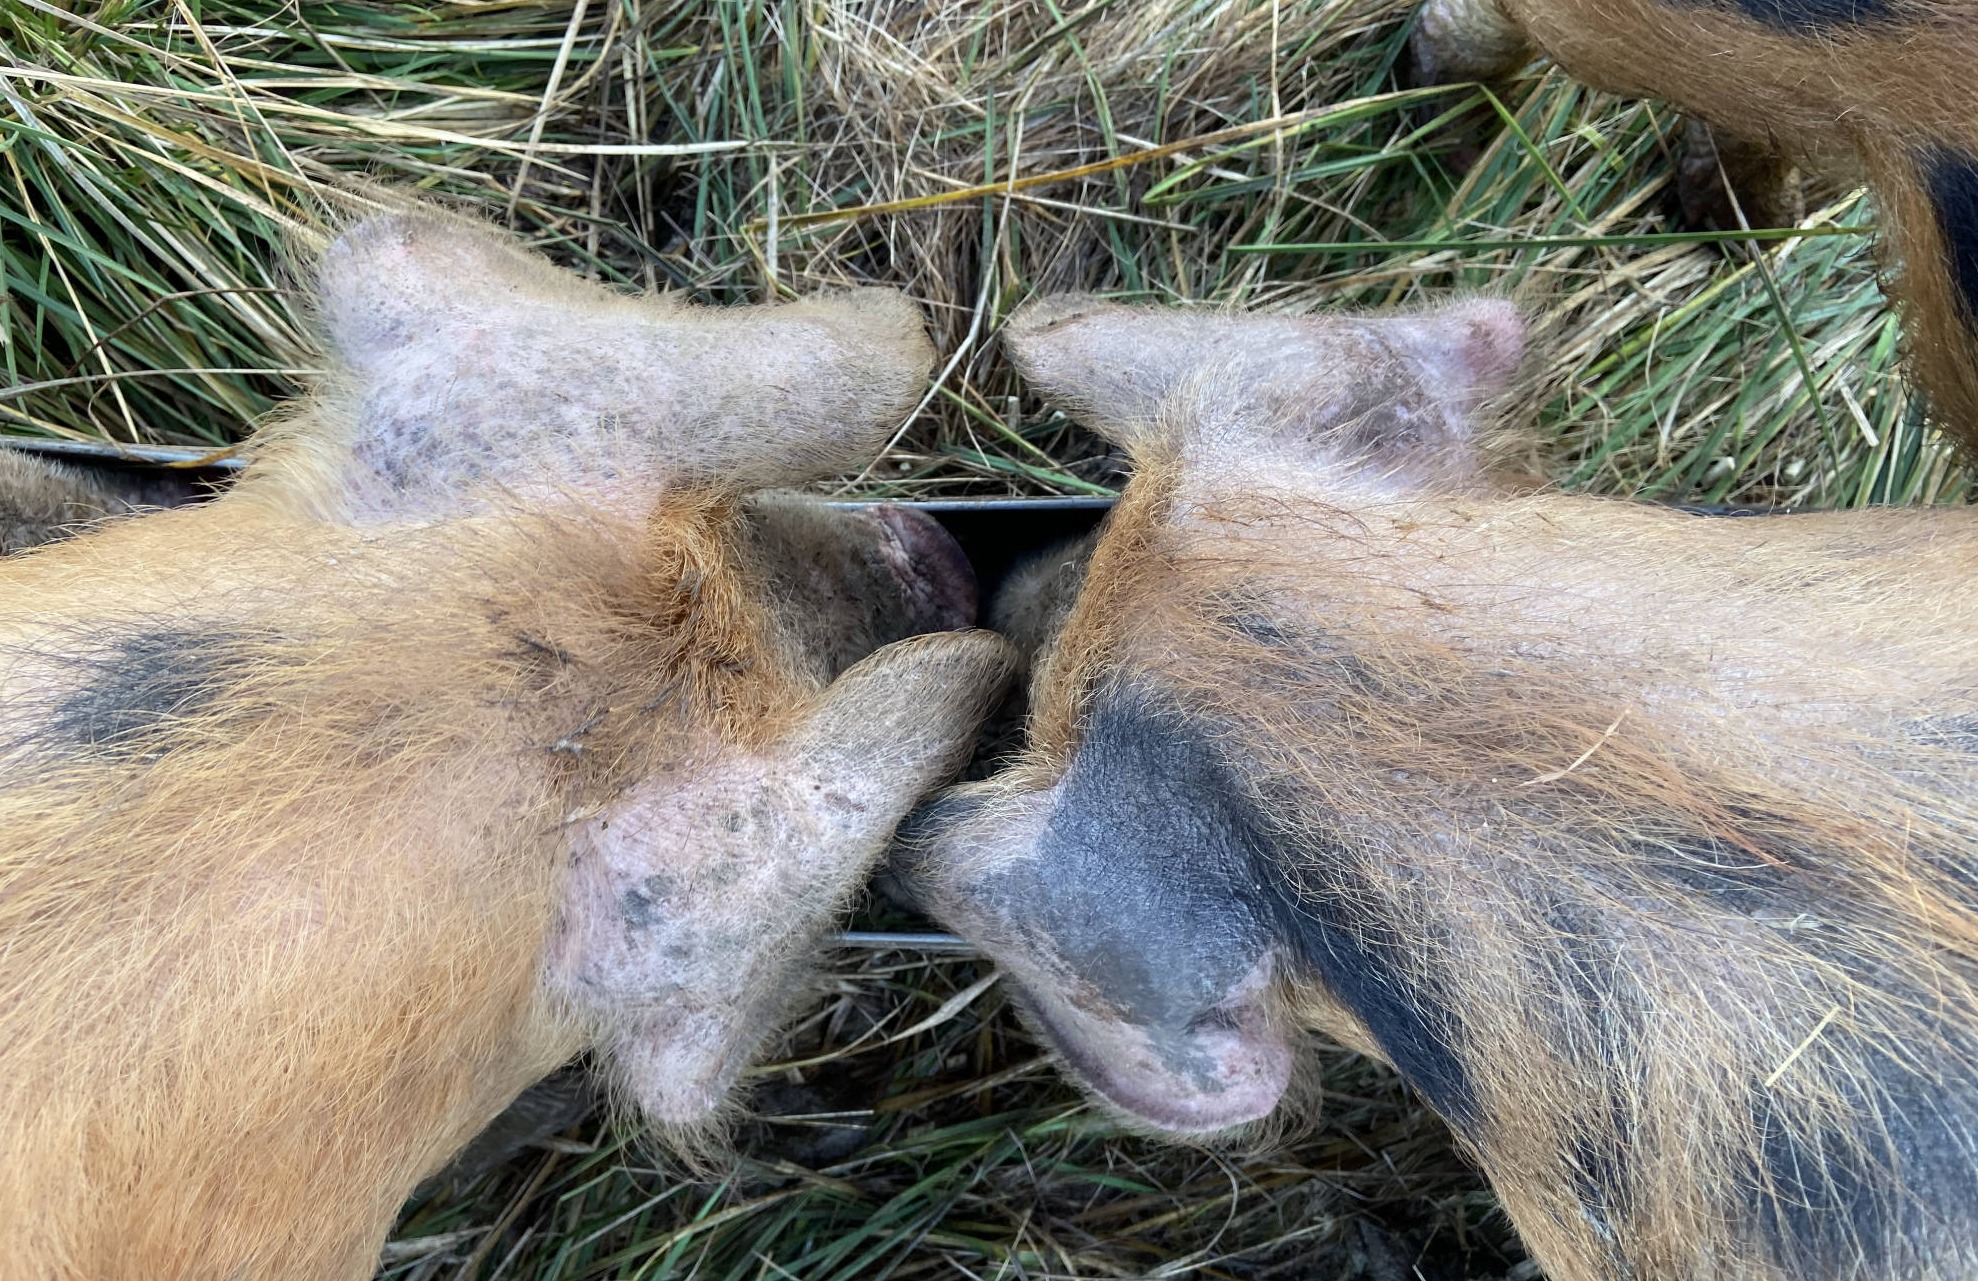 Two Oxford Sandy and Black pigs feeding from their organic feed